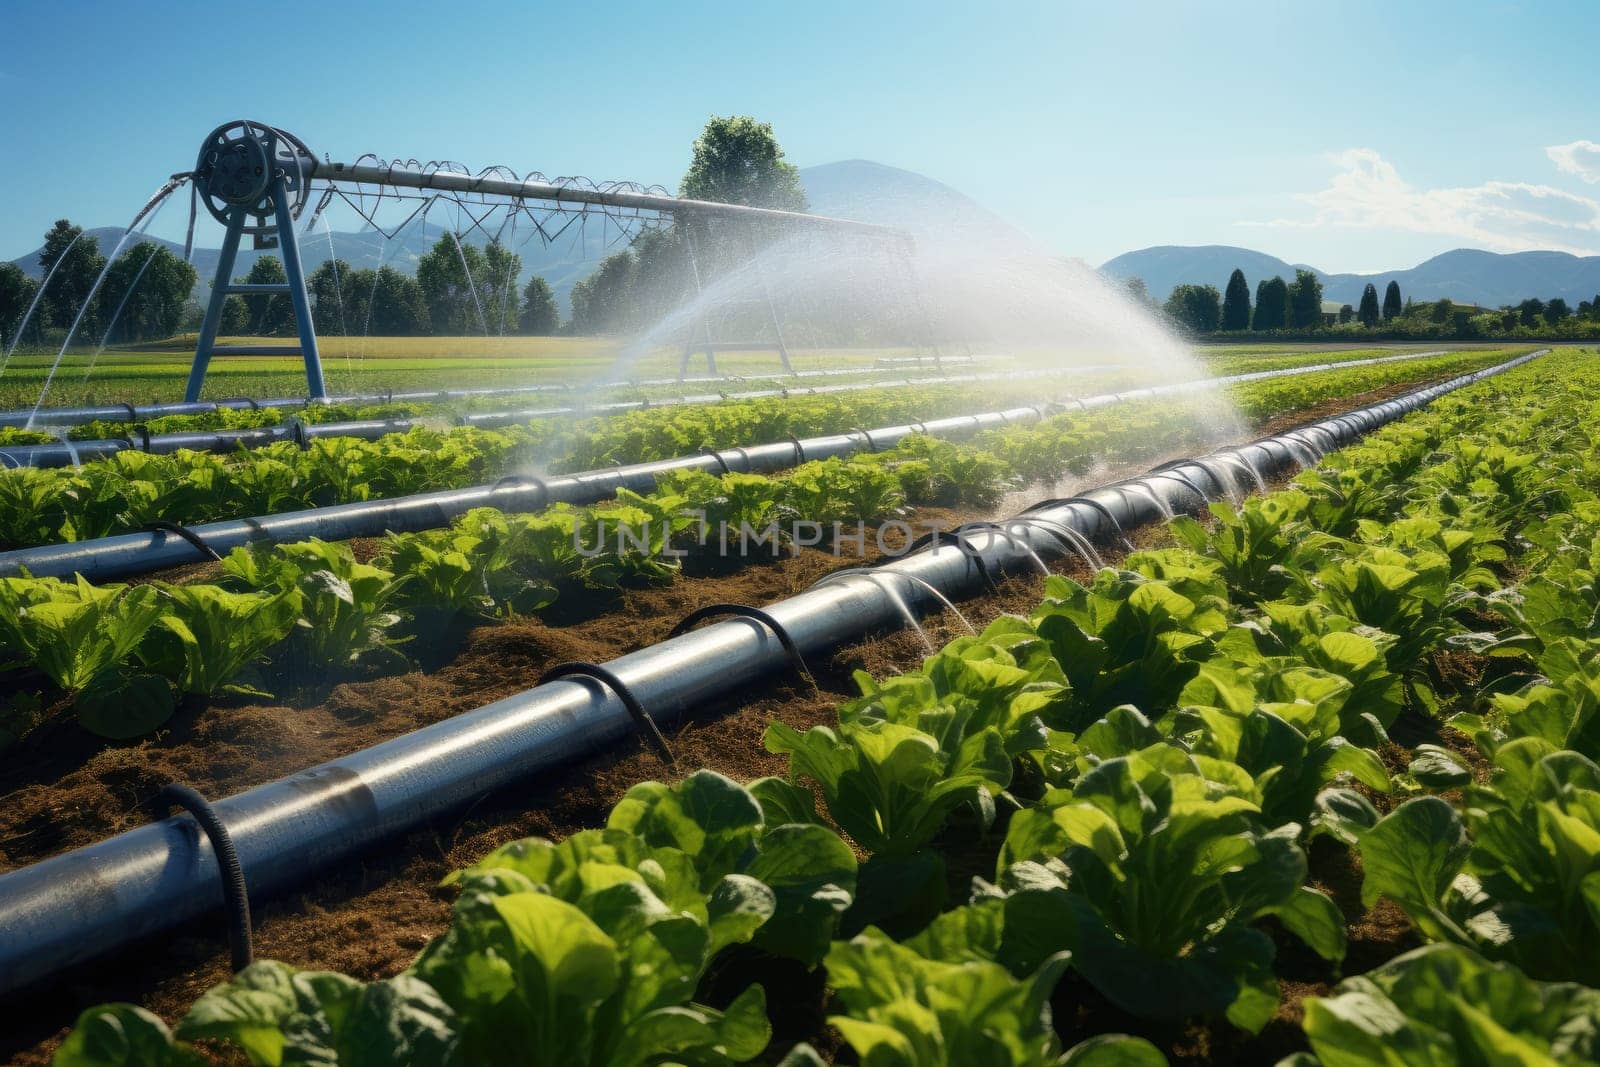 A state-of-the-art smart watering system designed to ensure optimal irrigation for plants, providing the perfect amount of water to support their growth and health.